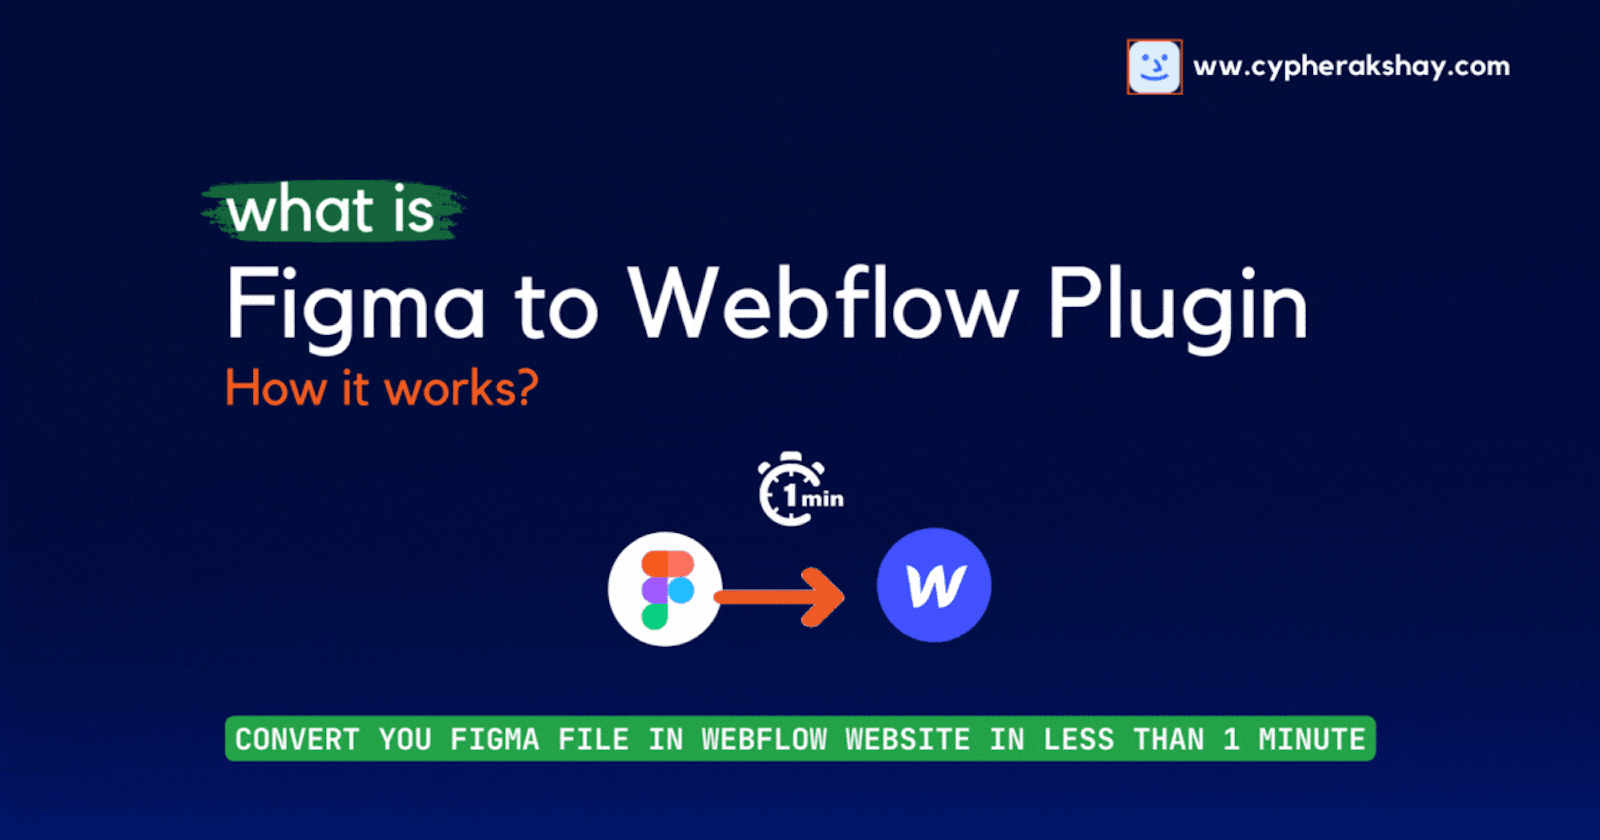 What is Figma to Webflow Plugin? and how it works?